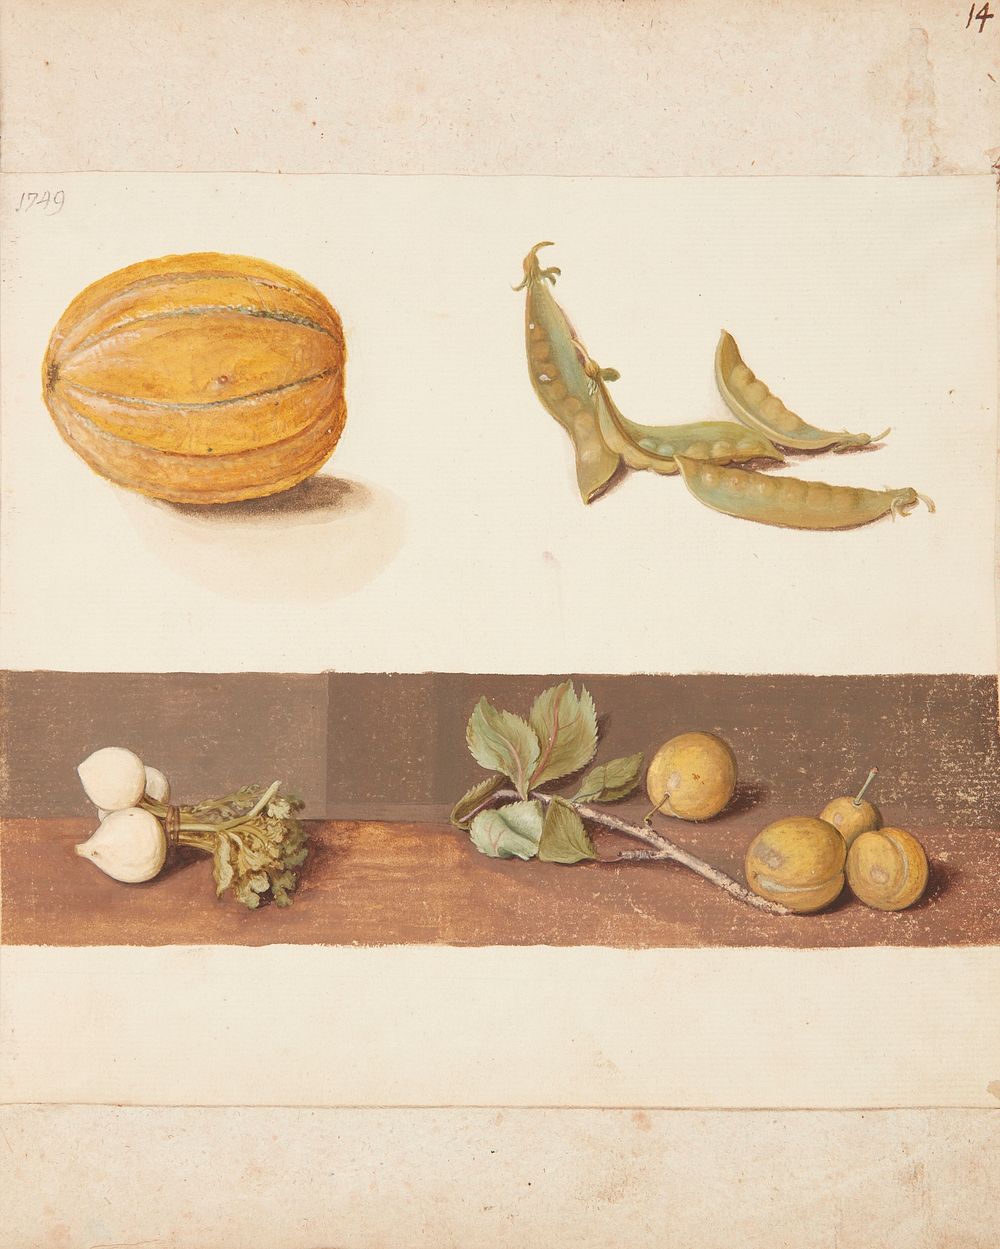 Study of fruit and vegetables by Johanna Fosie